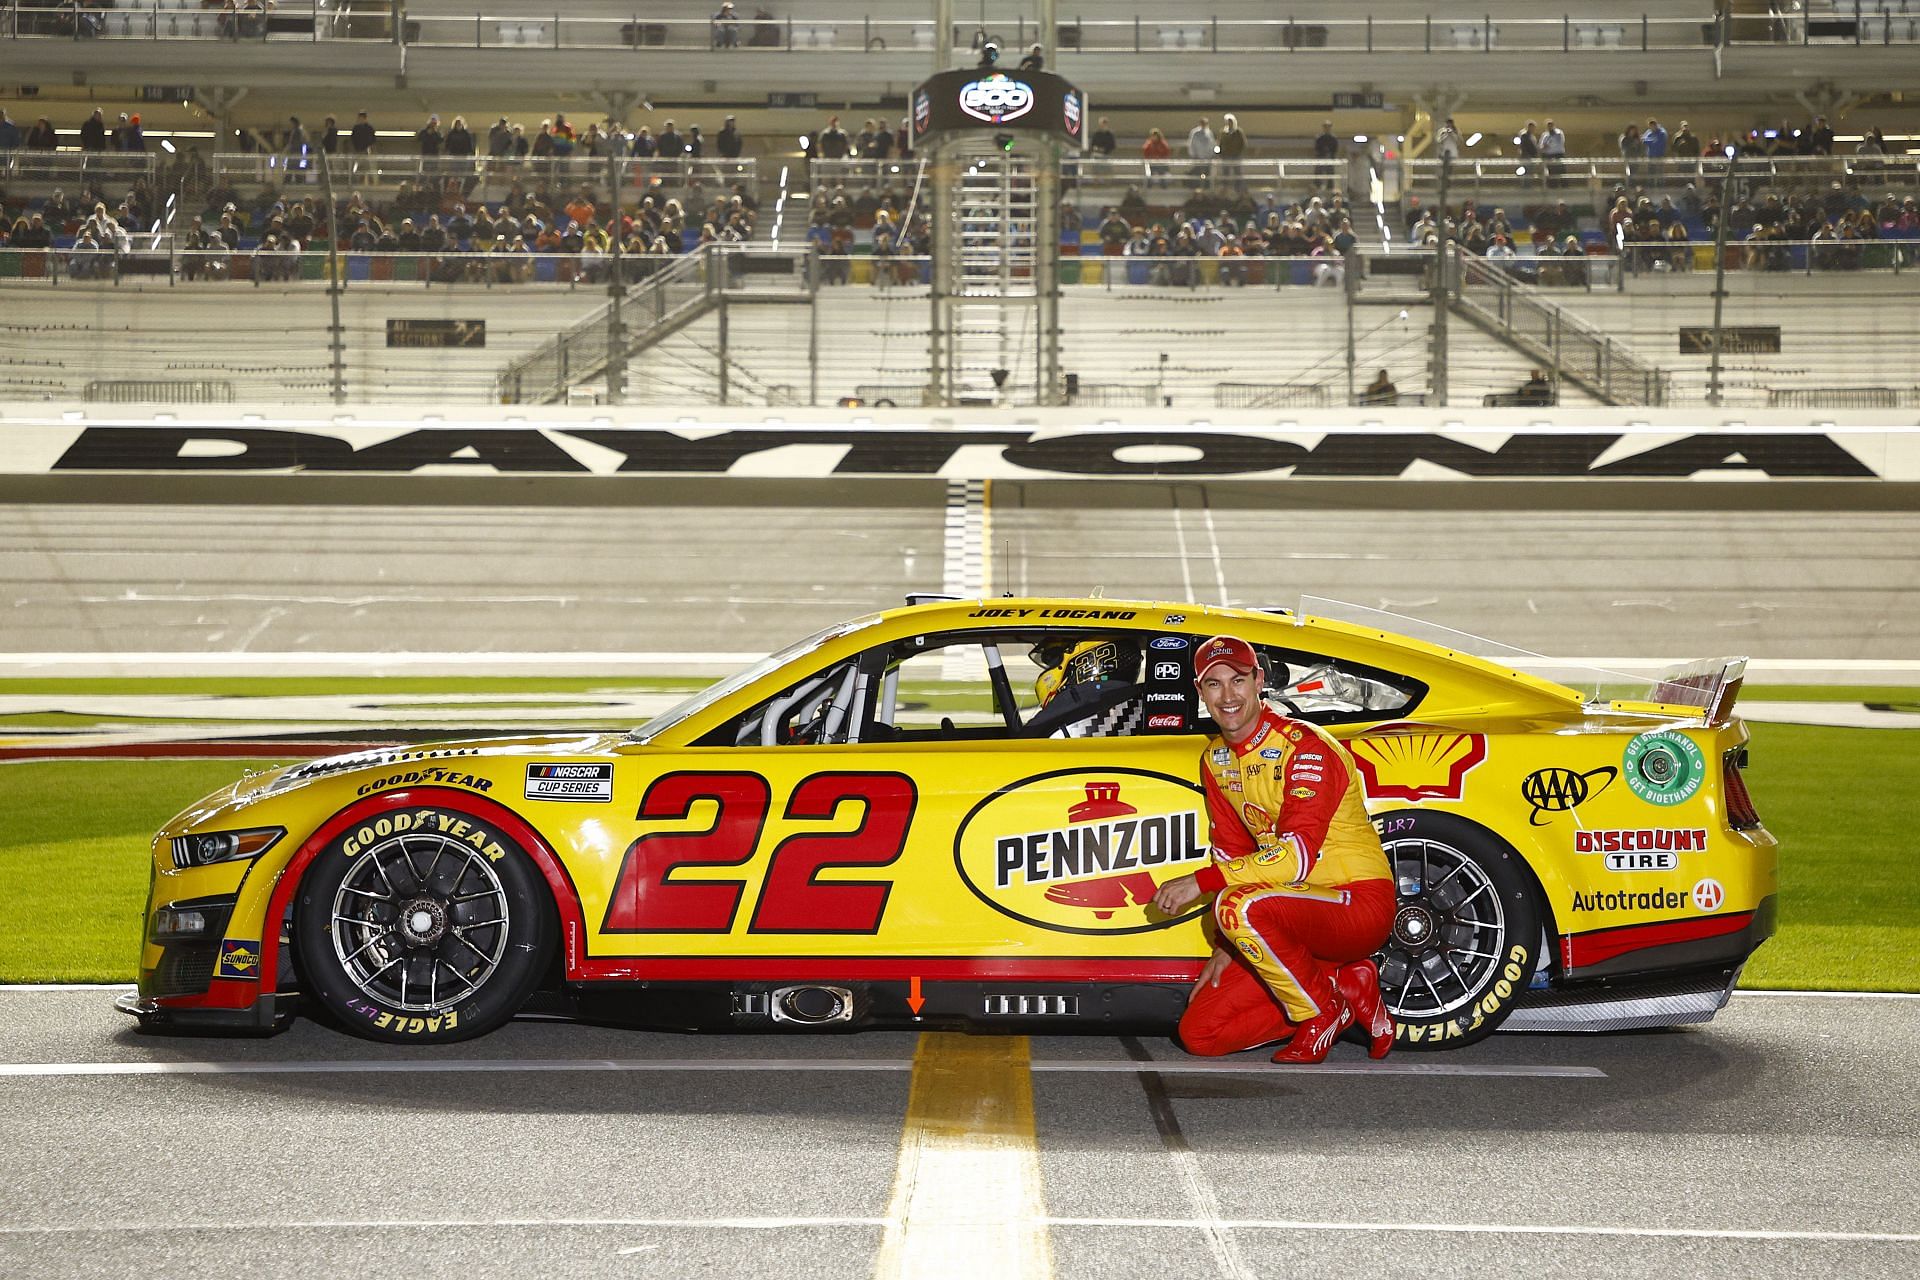 Joey Logano poses with his #22 car before the NASCAR Cup Series 64th Annual Daytona 500 Qualifying